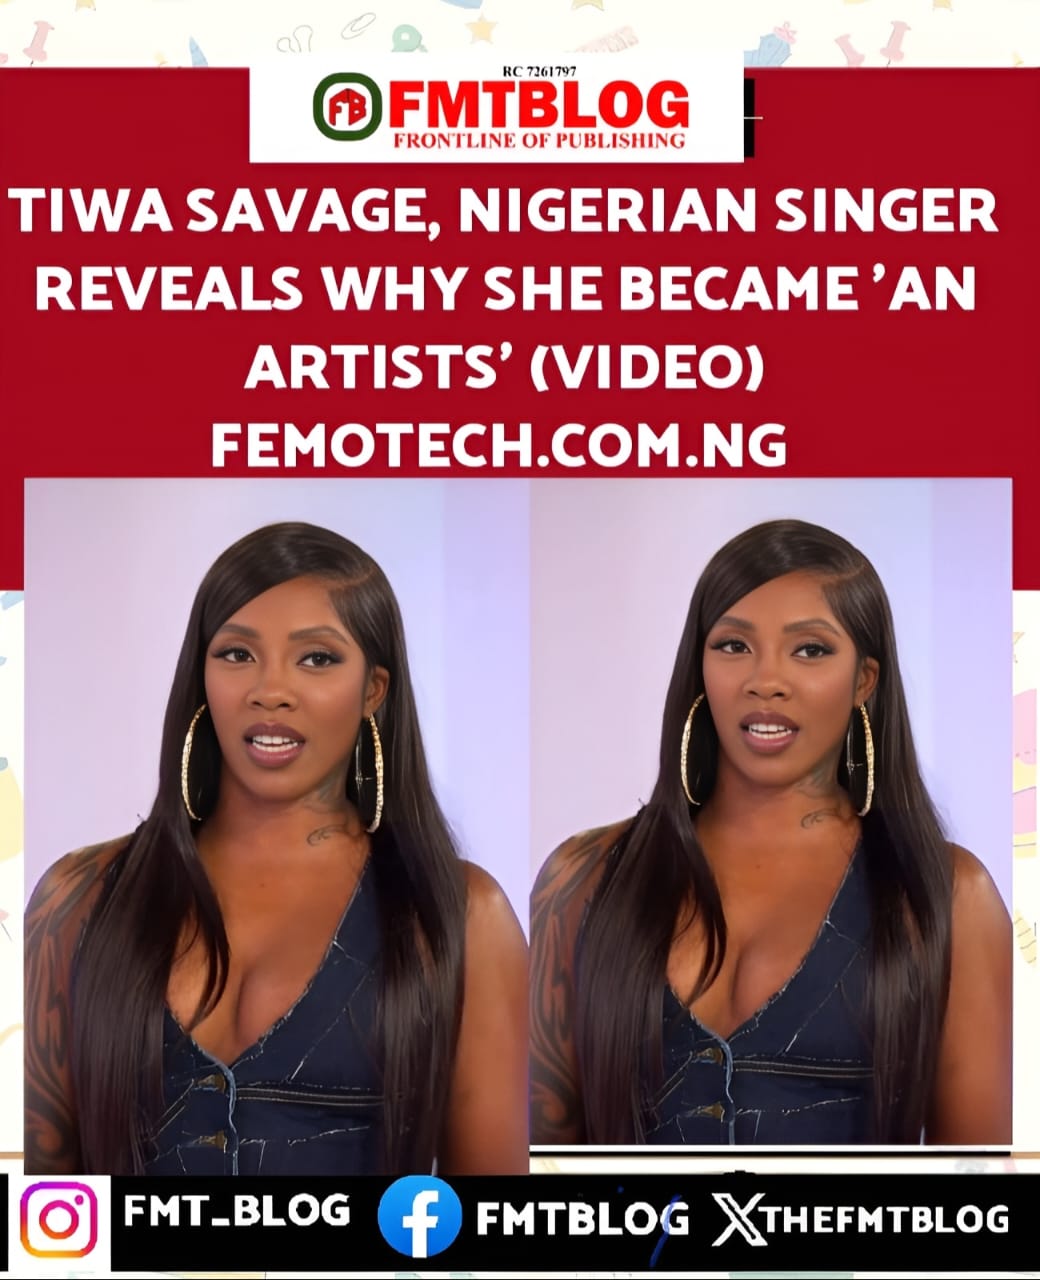 Tiwa Savage, Nigerian Singer, Reveals Why She Became ‘An Artist’ (VIDEO)